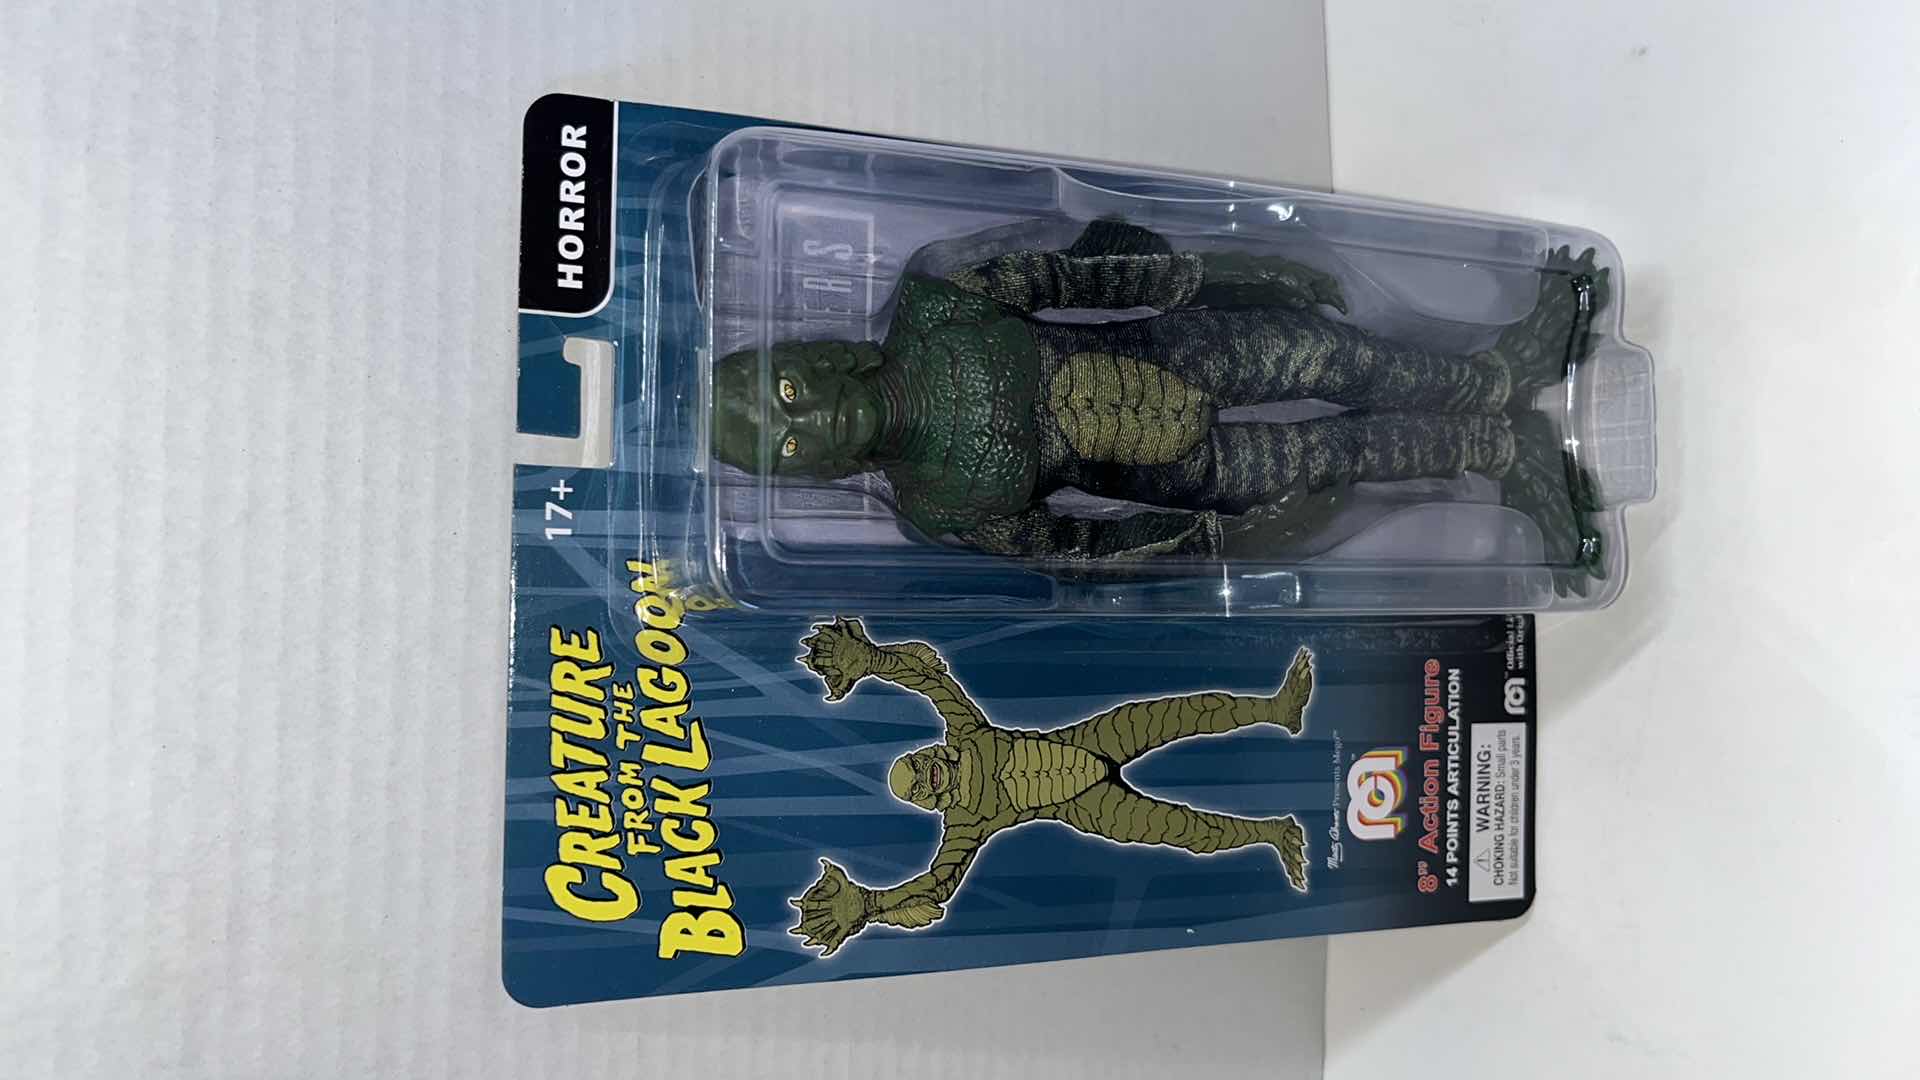 Photo 4 of NIB WORLDS GREATEST MEGO MONSTERS 8” ACTION FIGURE, FRANKENSTEIN & CREATURE FROM THE BLACK LAGOON (2)